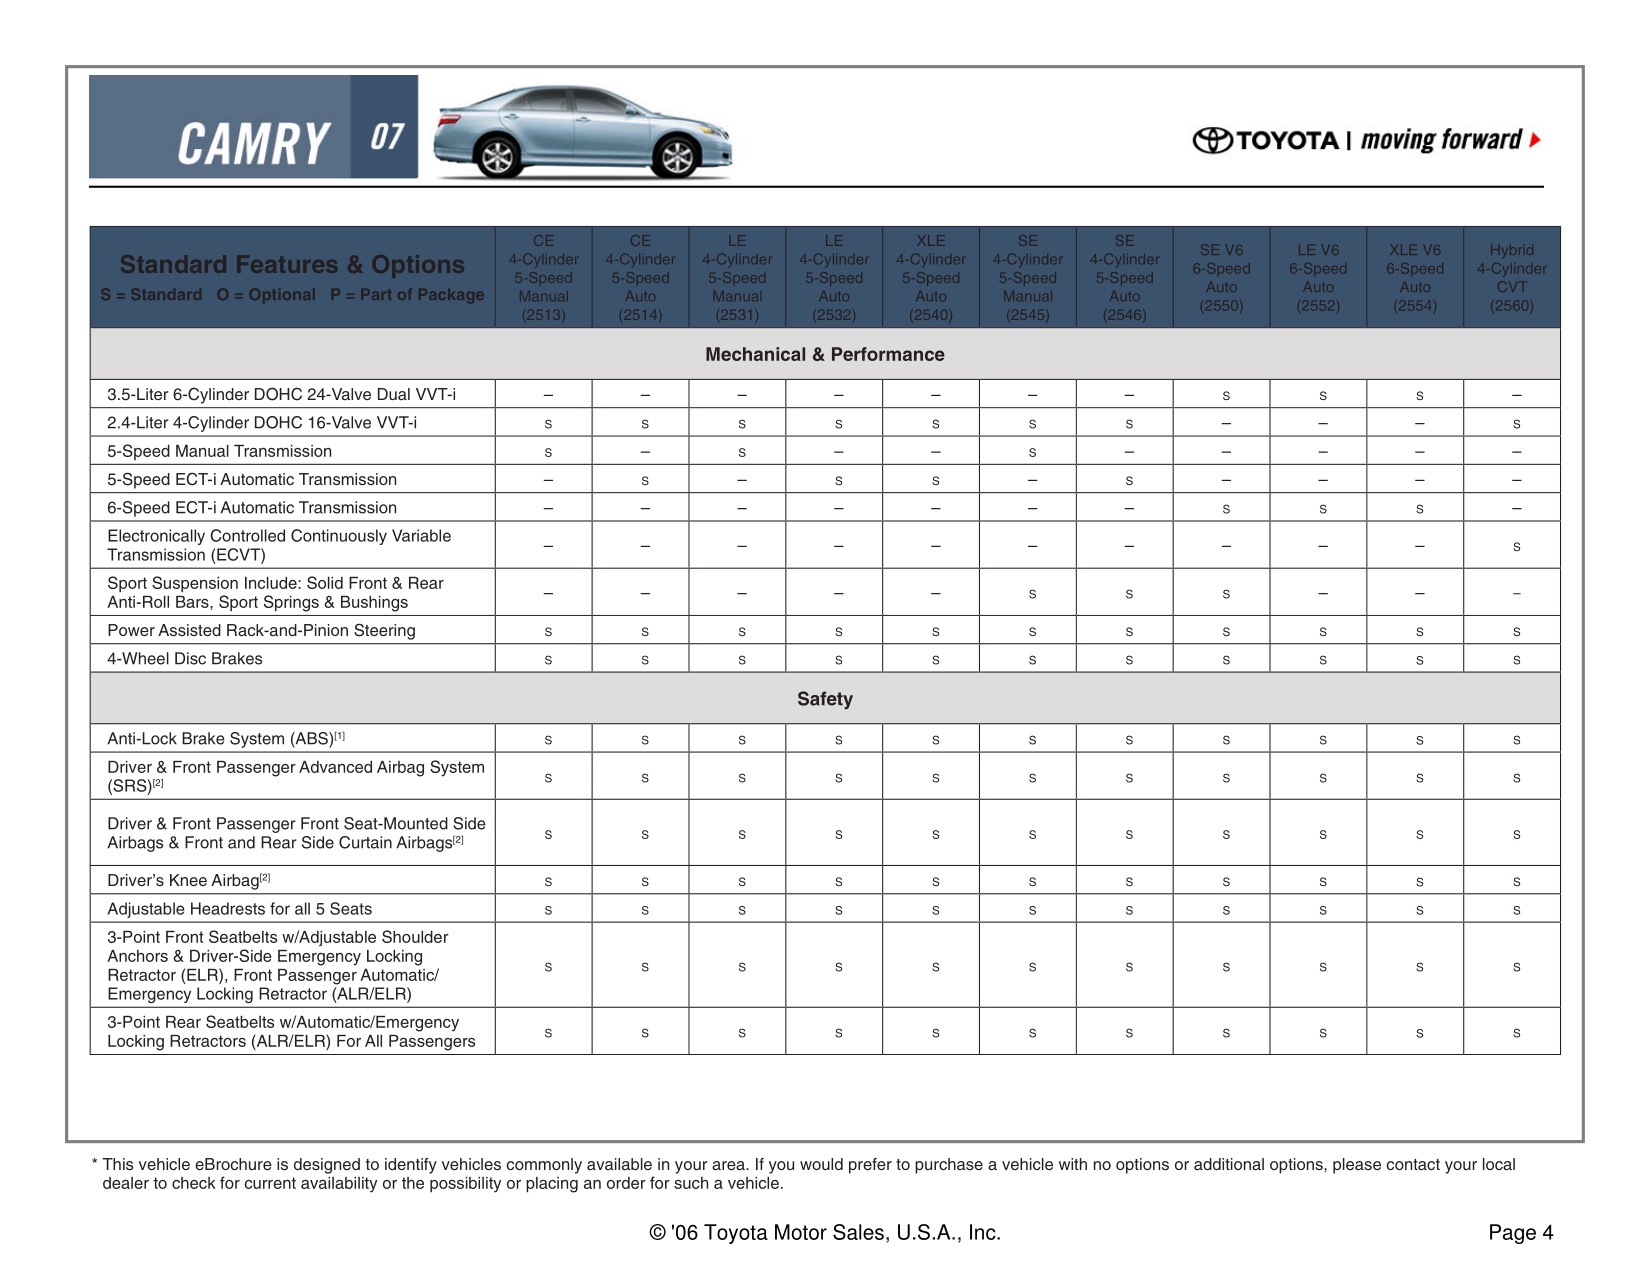 2007 Toyota Camry Brochure Page 3